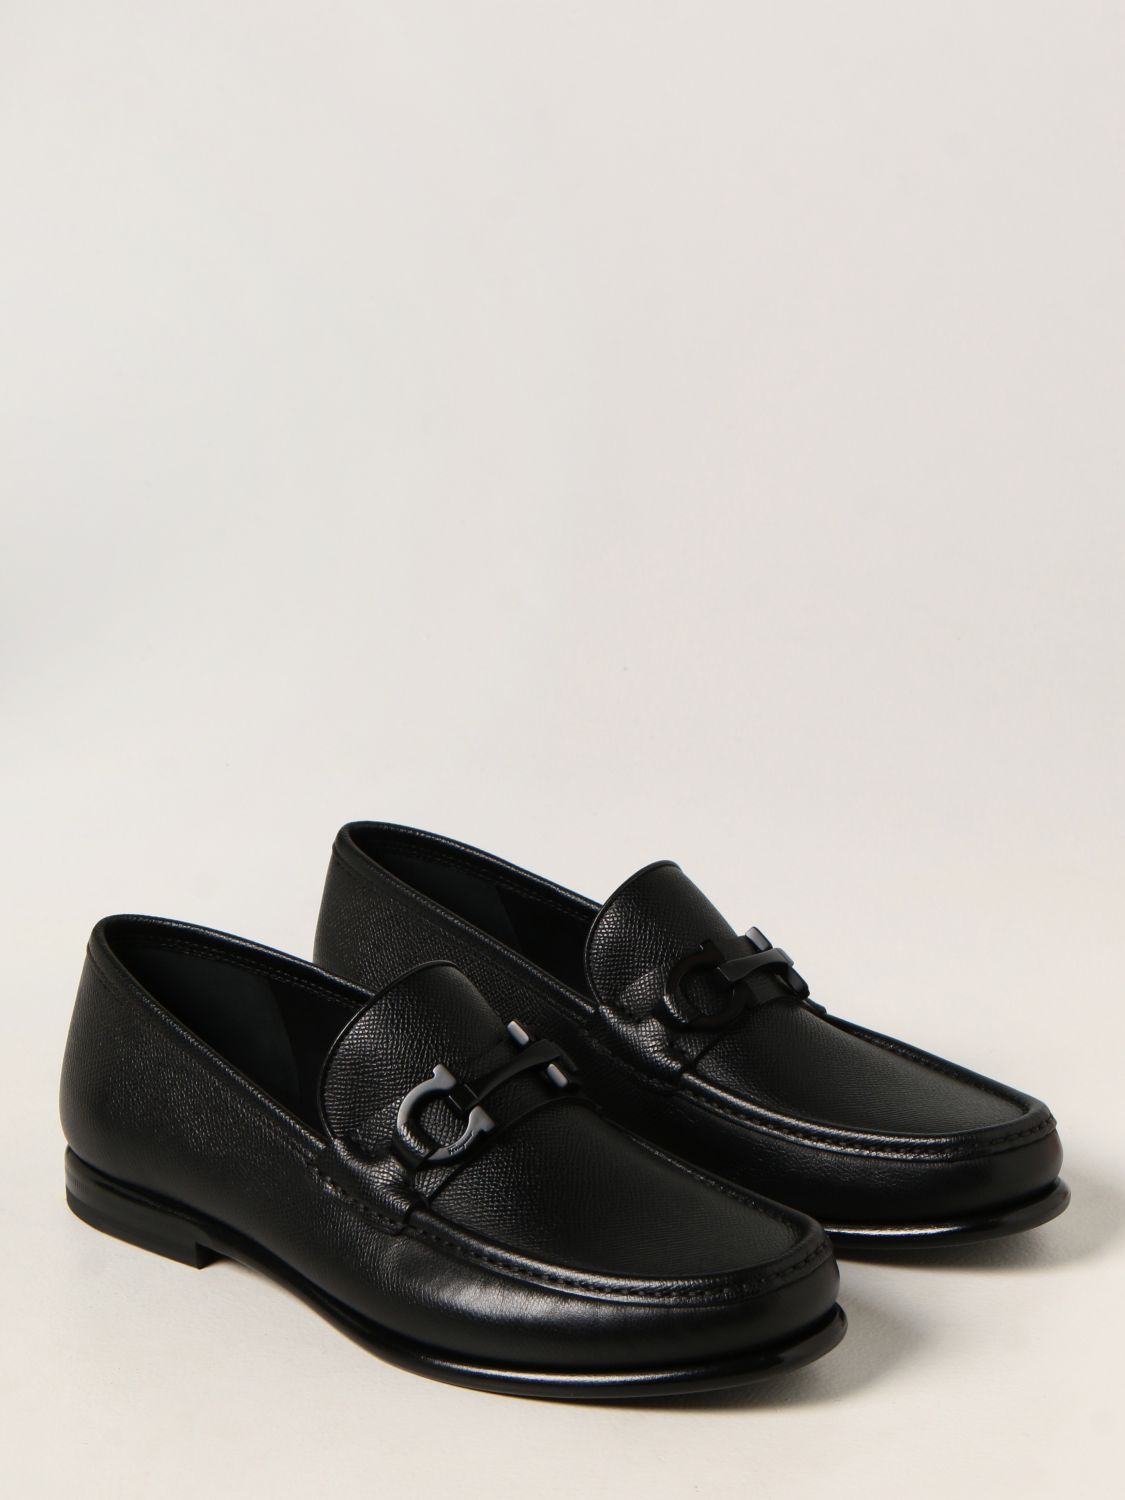 SALVATORE FERRAGAMO: Crown grained leather loafers - Black | Loafers ...